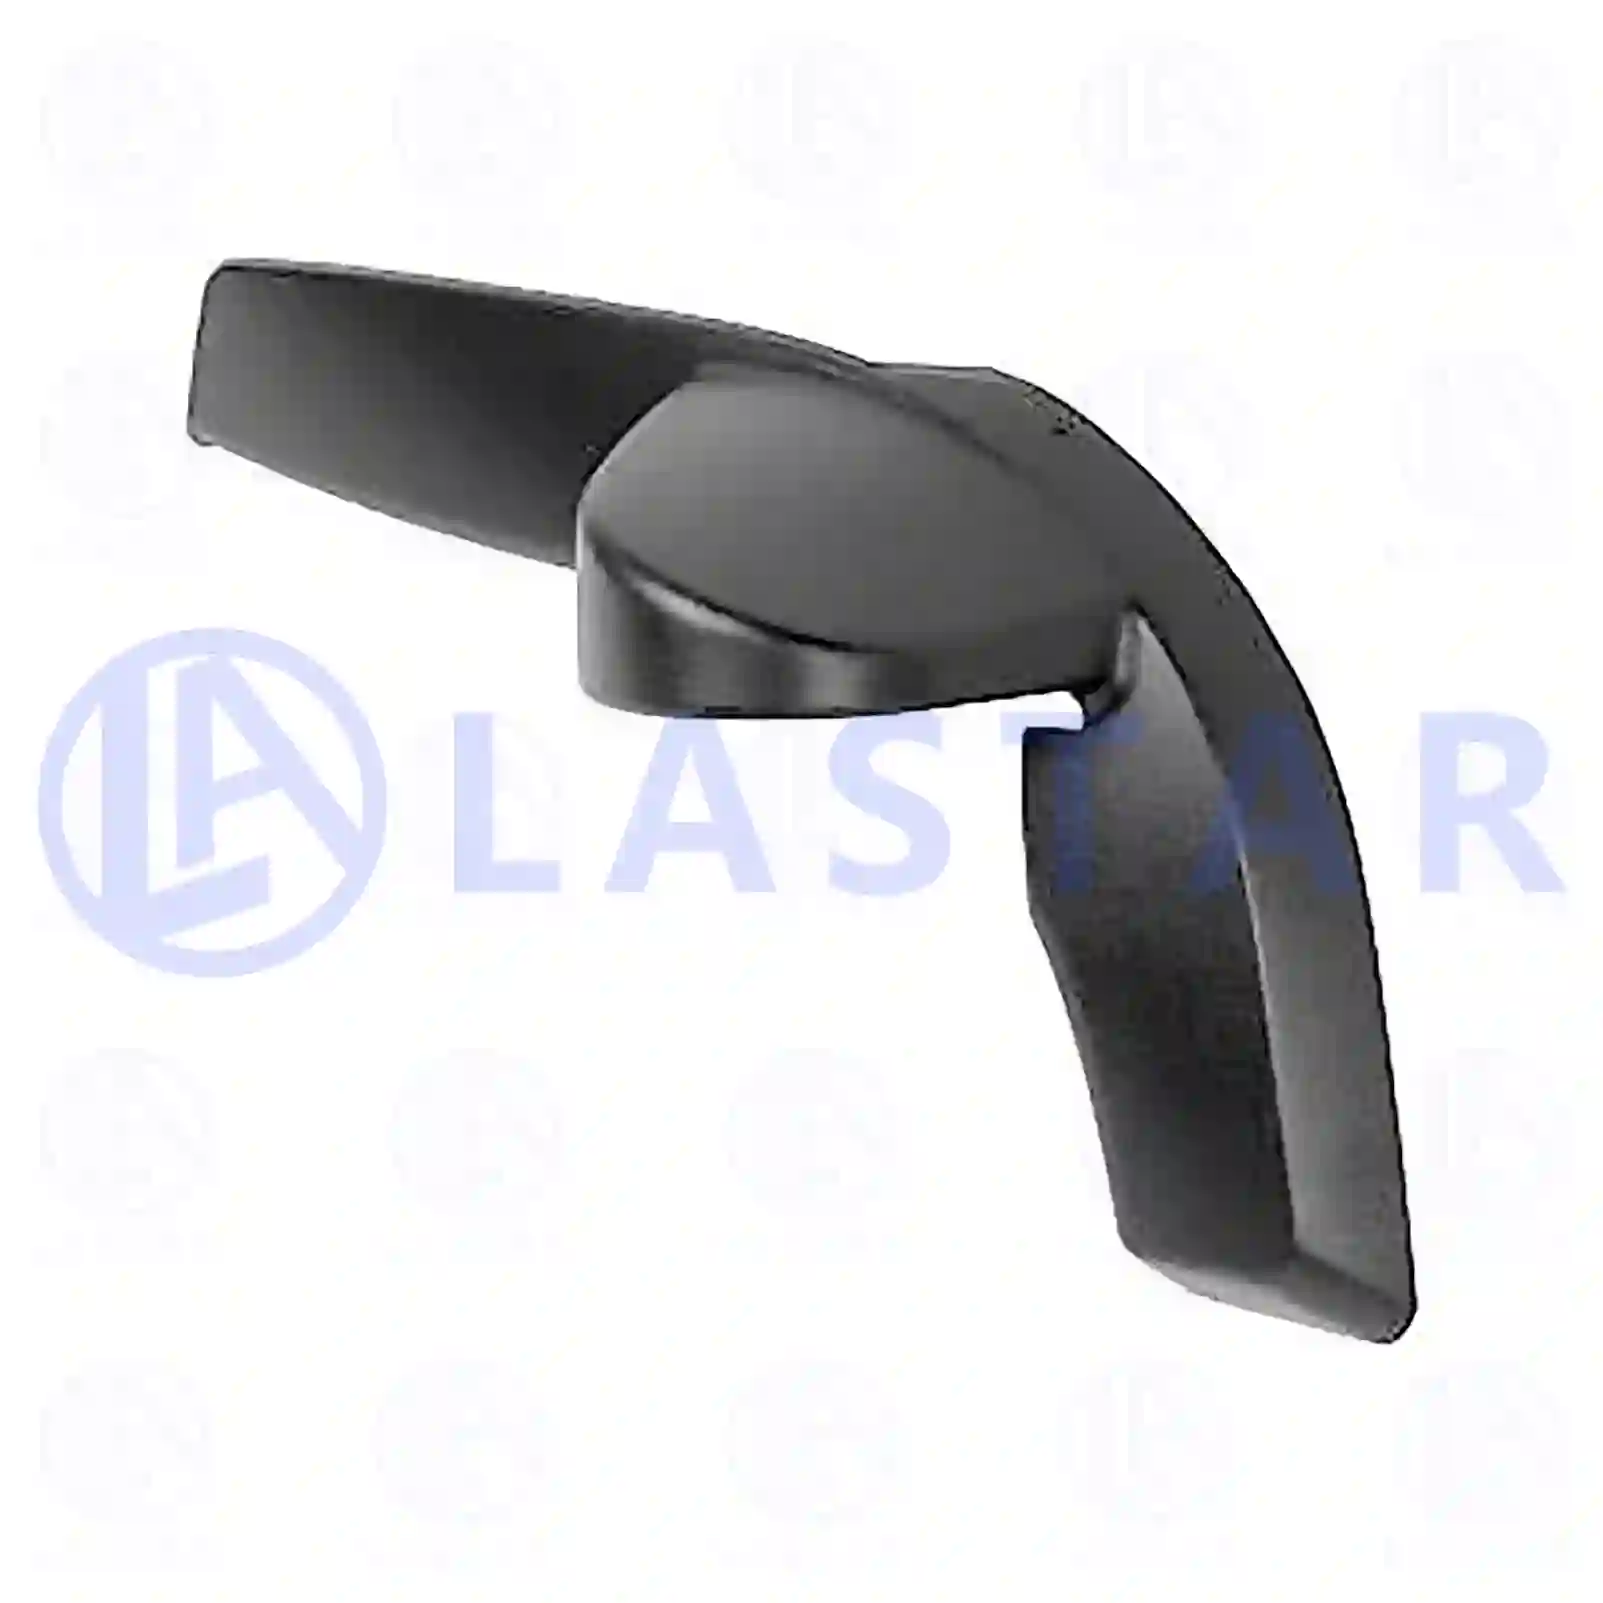 Cover, right, 77718591, 81637320074, 2V5857086A, ZG60490-0008 ||  77718591 Lastar Spare Part | Truck Spare Parts, Auotomotive Spare Parts Cover, right, 77718591, 81637320074, 2V5857086A, ZG60490-0008 ||  77718591 Lastar Spare Part | Truck Spare Parts, Auotomotive Spare Parts